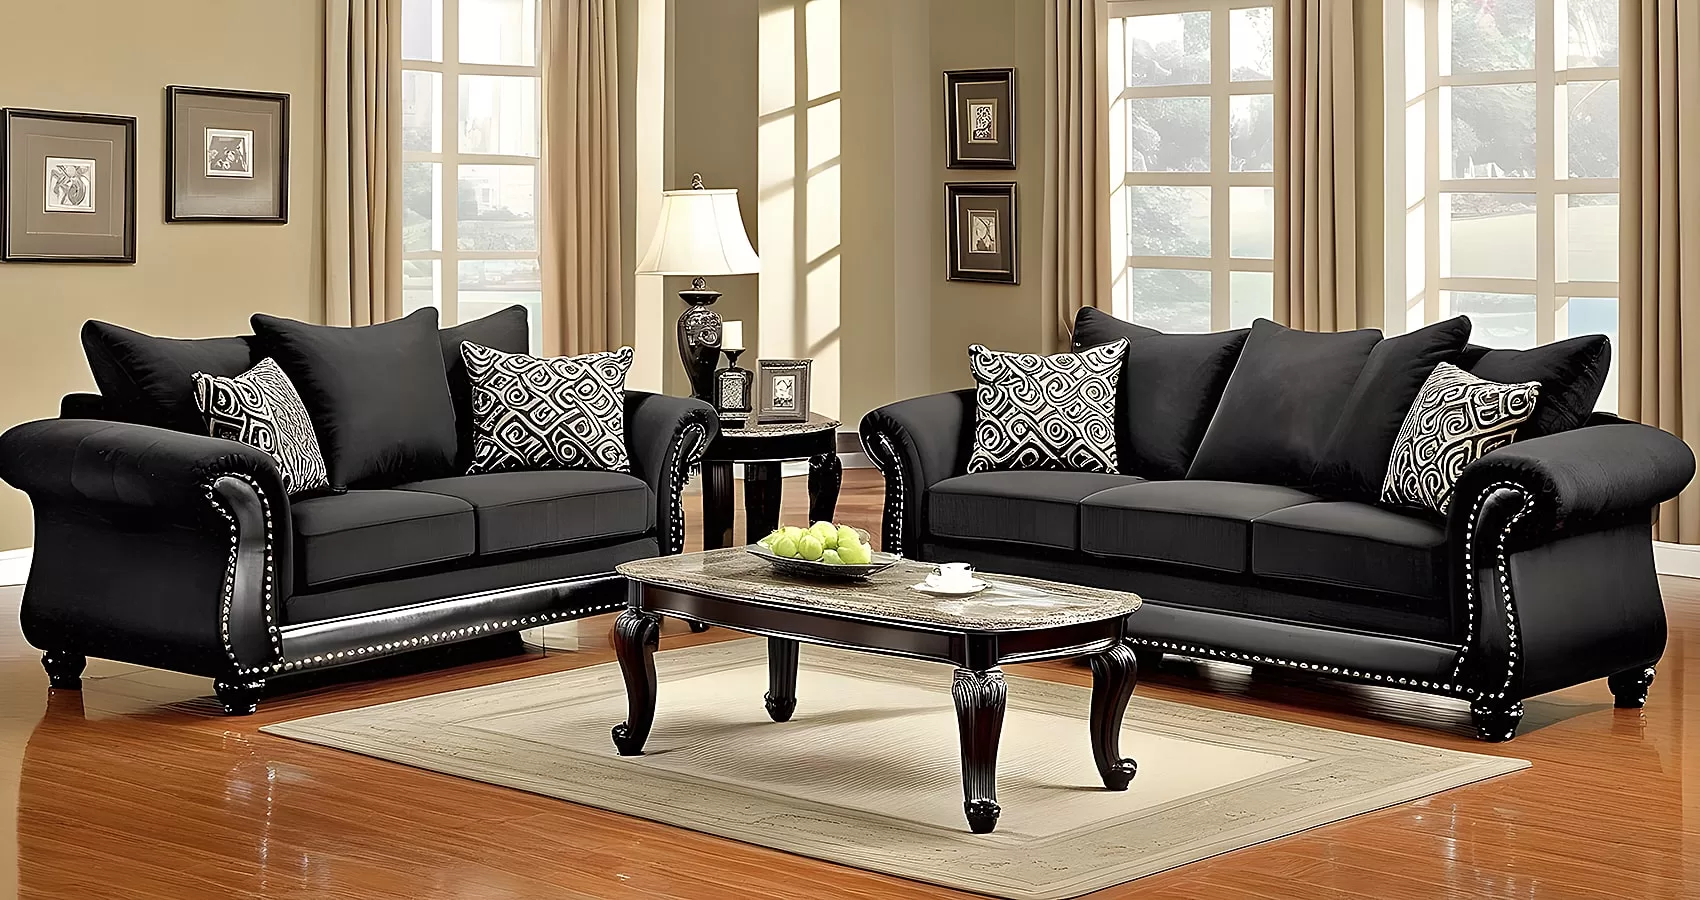 Black Sofa and Loveseat | Black Couch and Loveseat